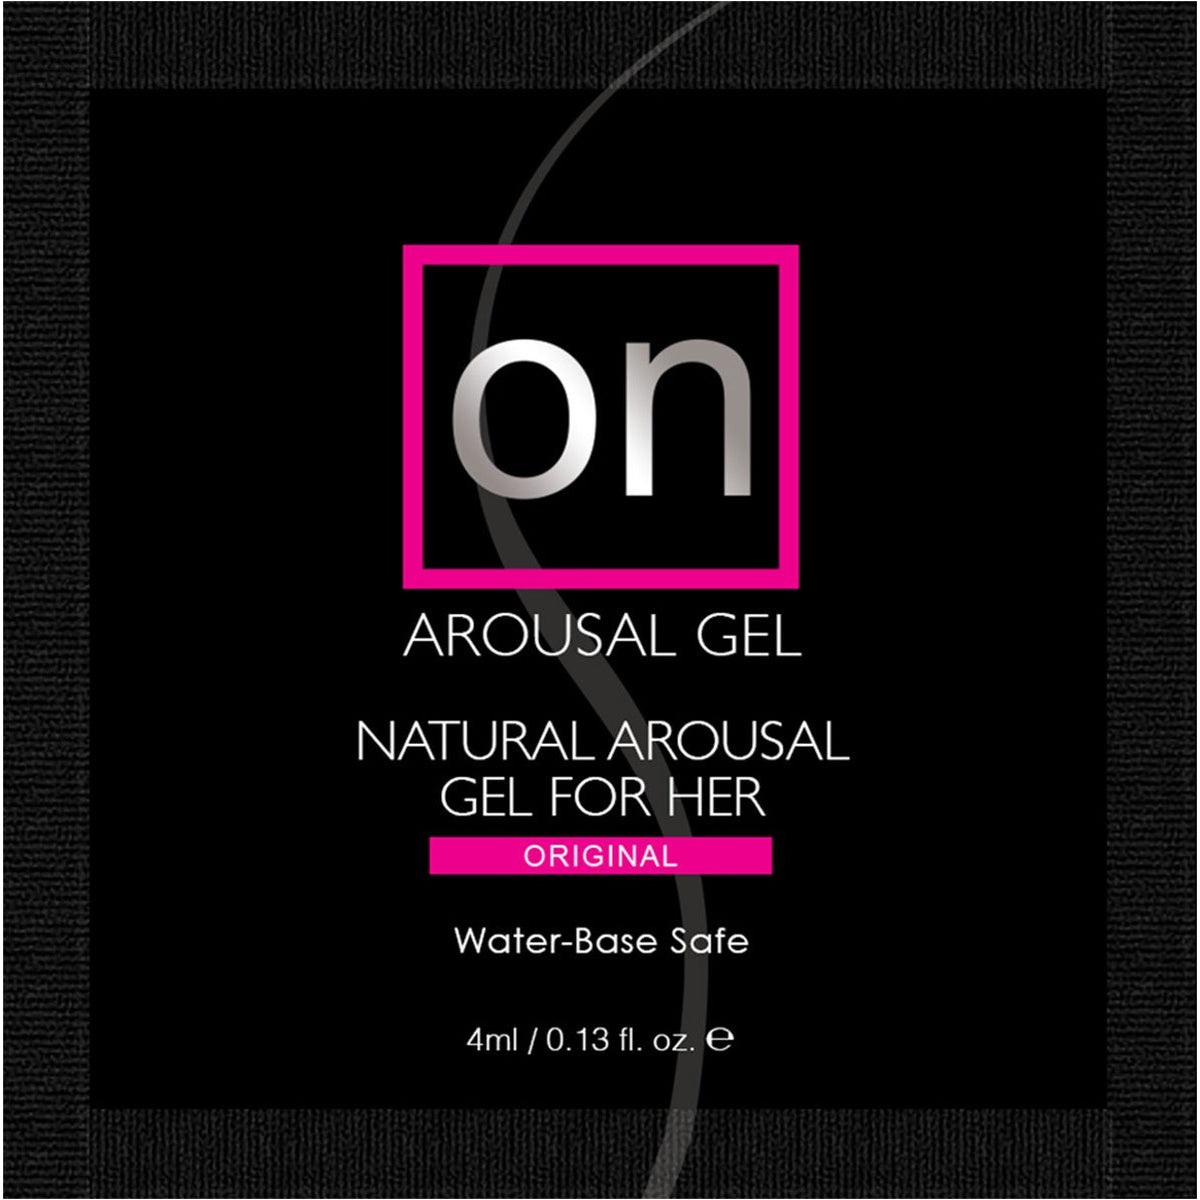 Sensuva ON for Her Arousal Gel Assorted - Foils and Display - 100 pc - 0.13 oz